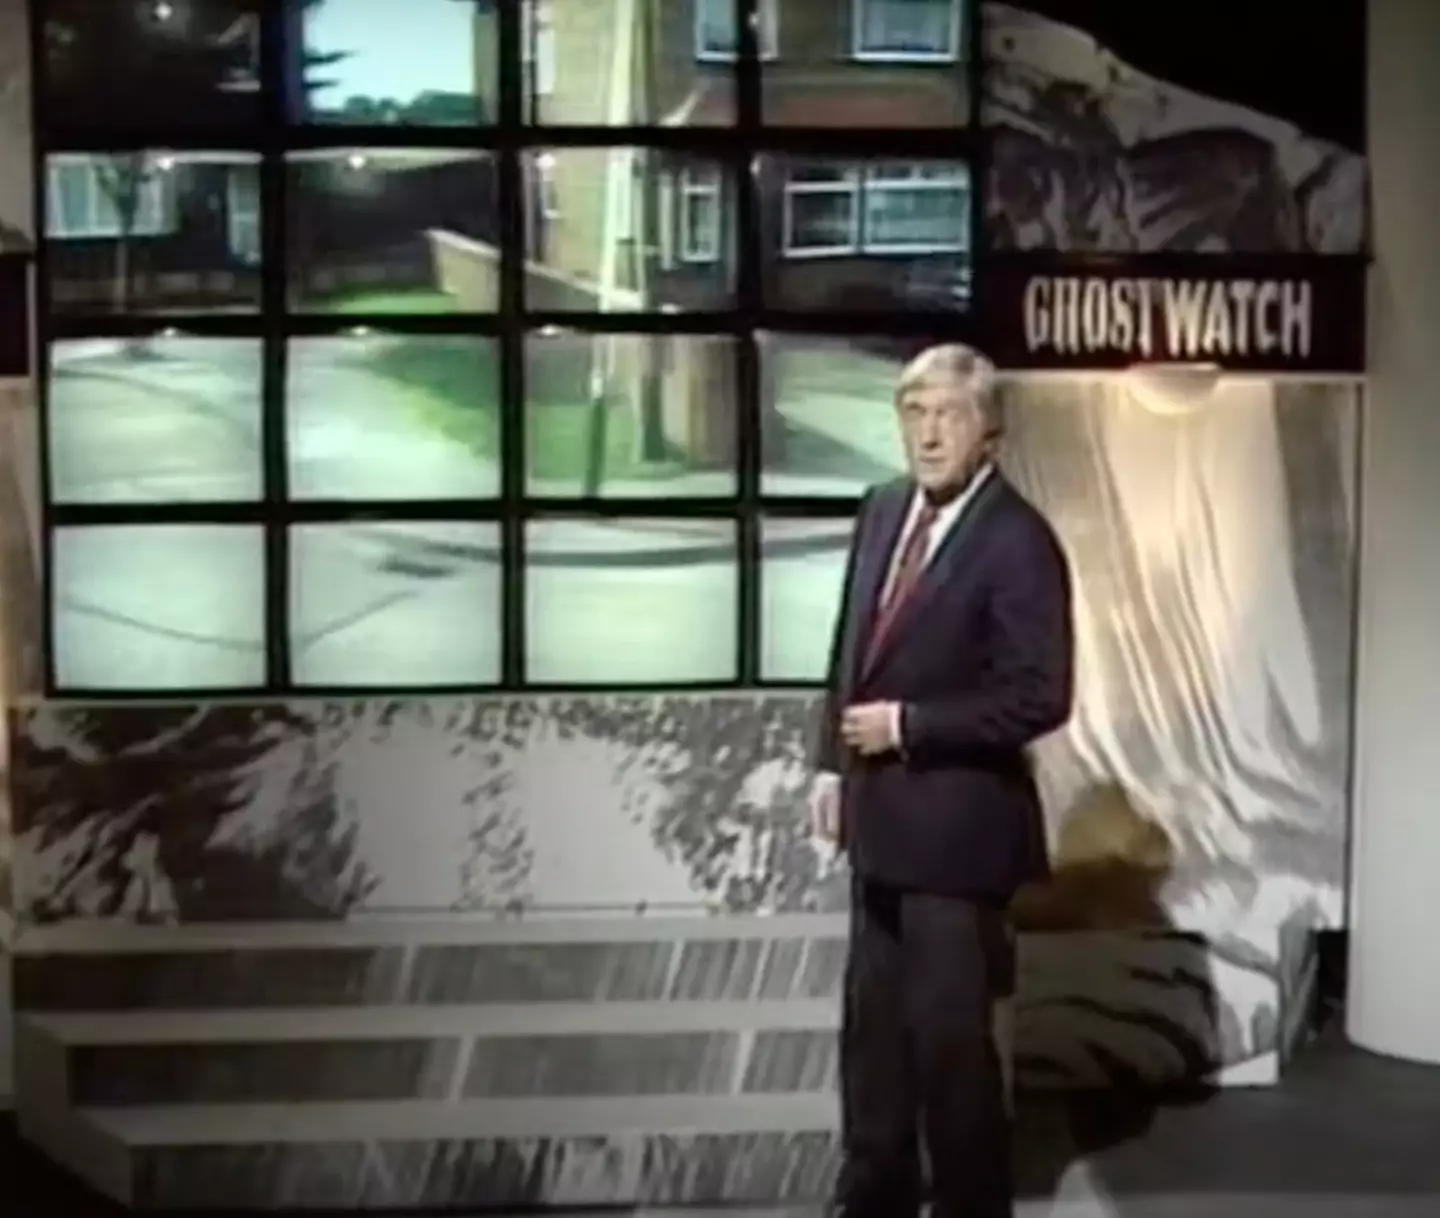 Fans have called for Ghostwatch to be repeated following Parkinson's death.